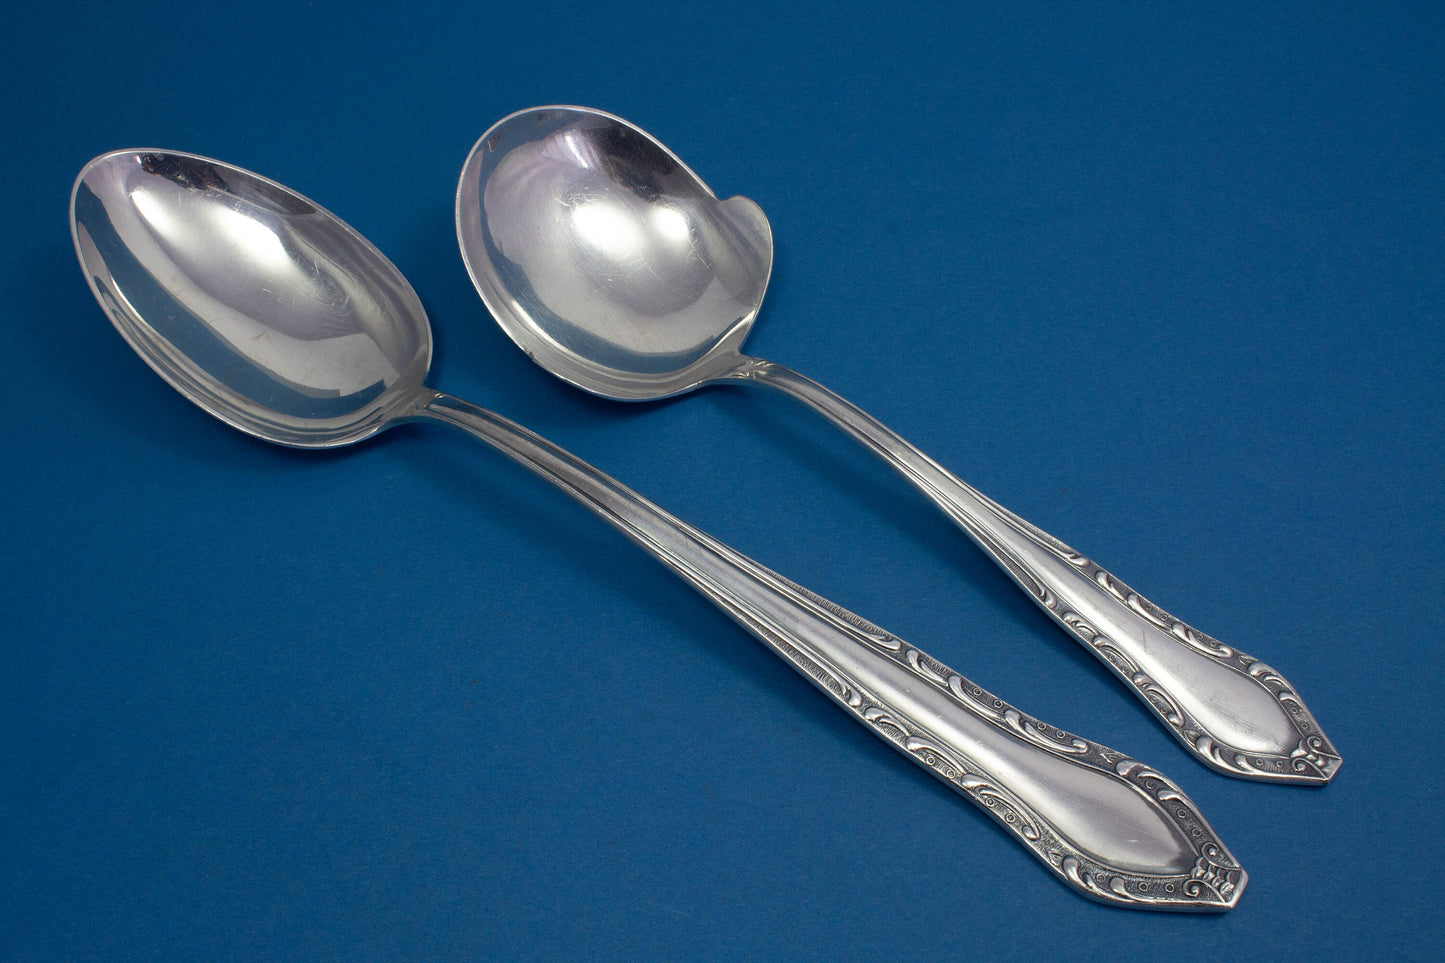 Large vegetable spoon with matching potato spoon, Rococo, silver-plated serving spoon